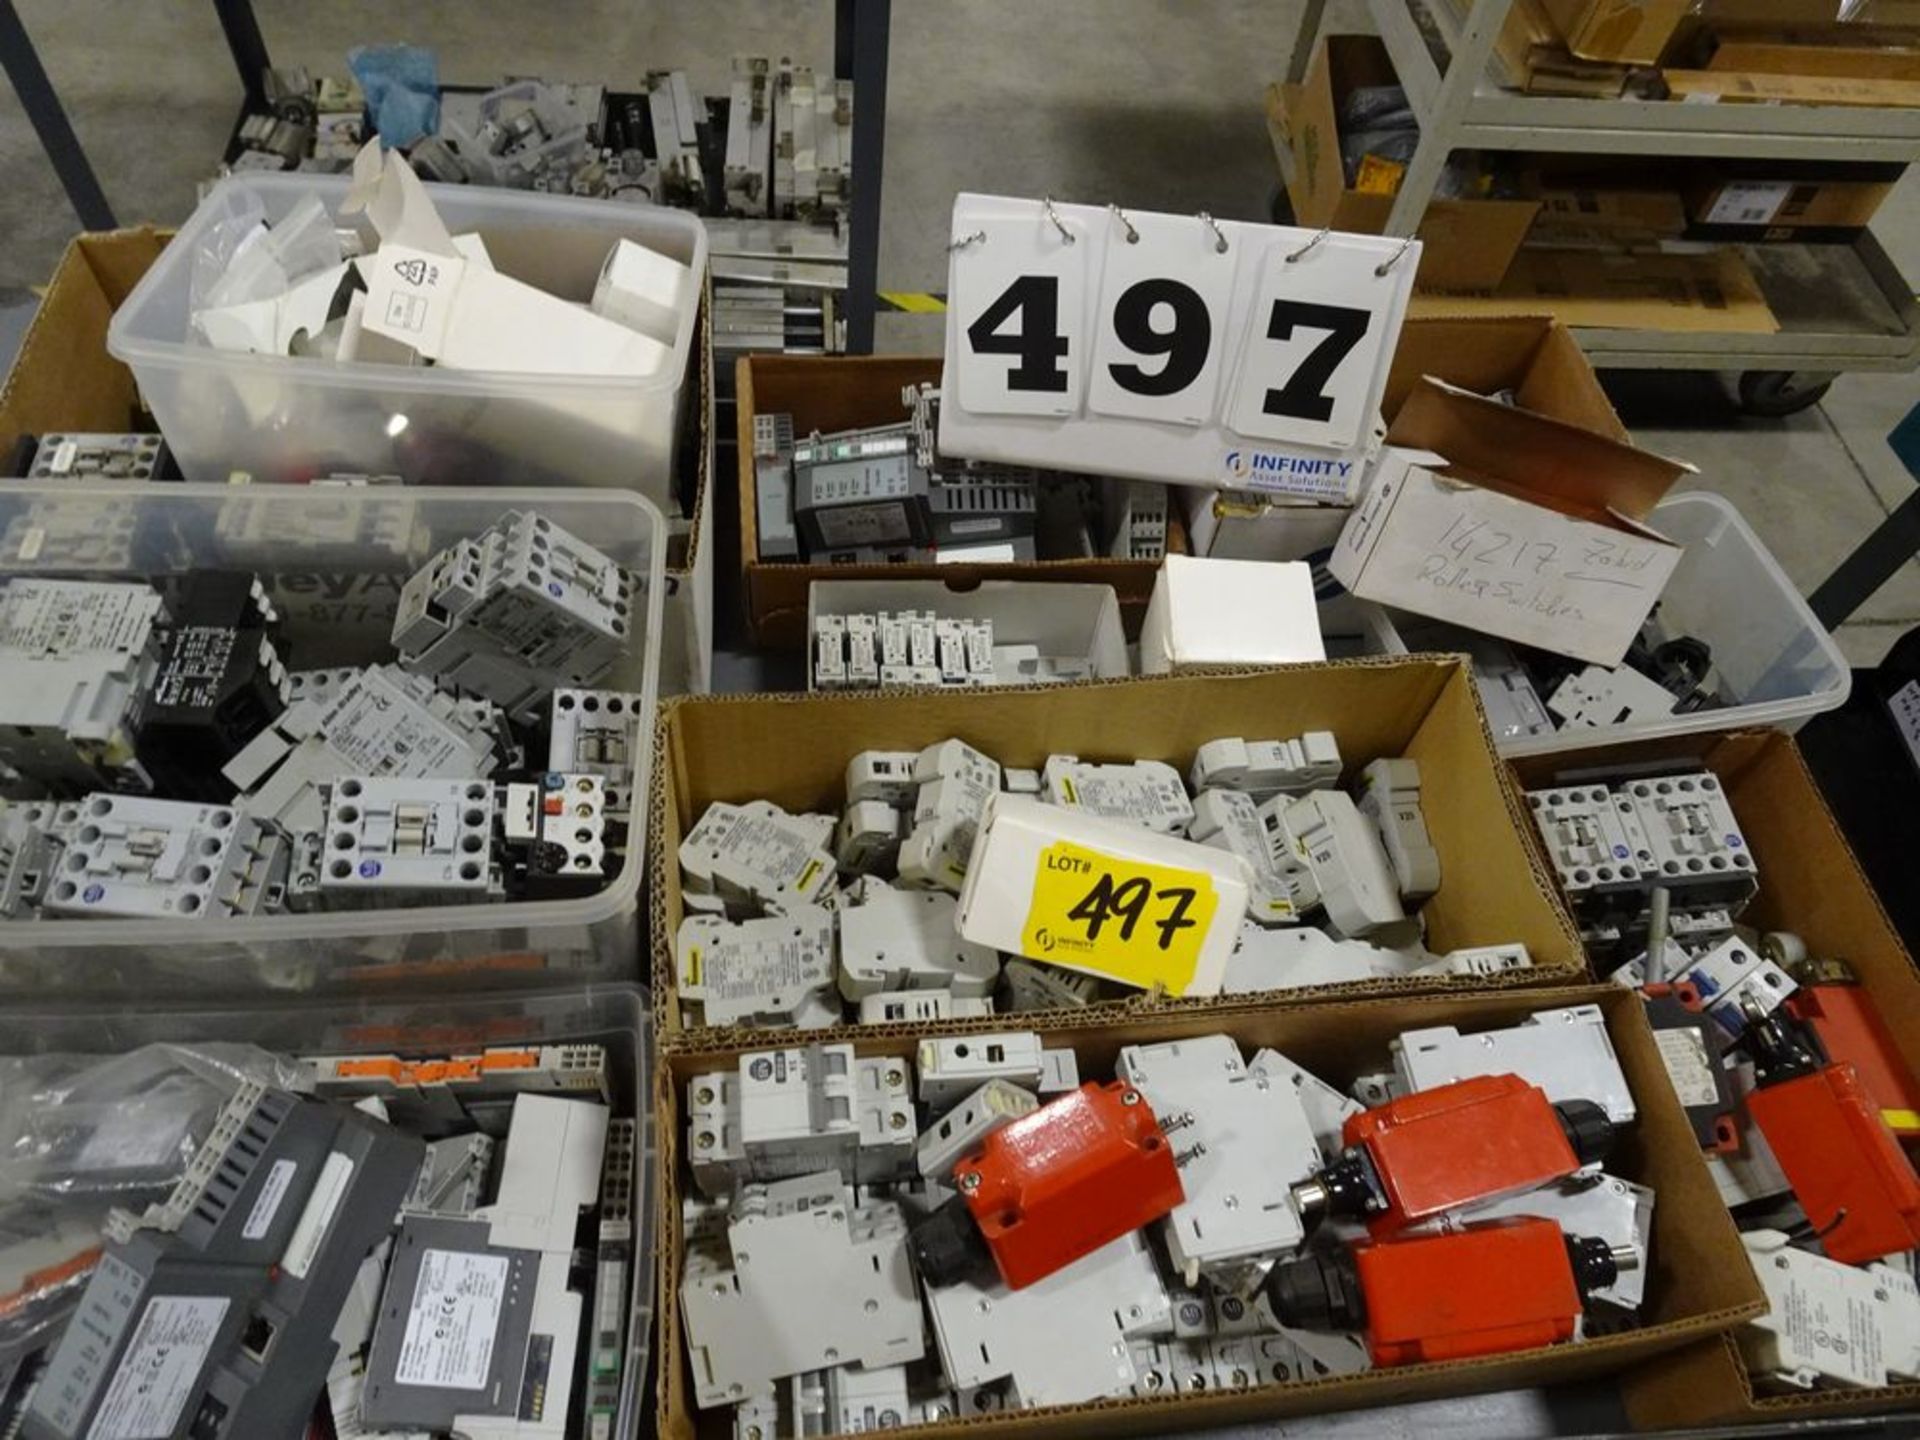 ASSORTED PRODUCT, SWITCHES, RELAYS, VALVES, ETC. - Image 2 of 3